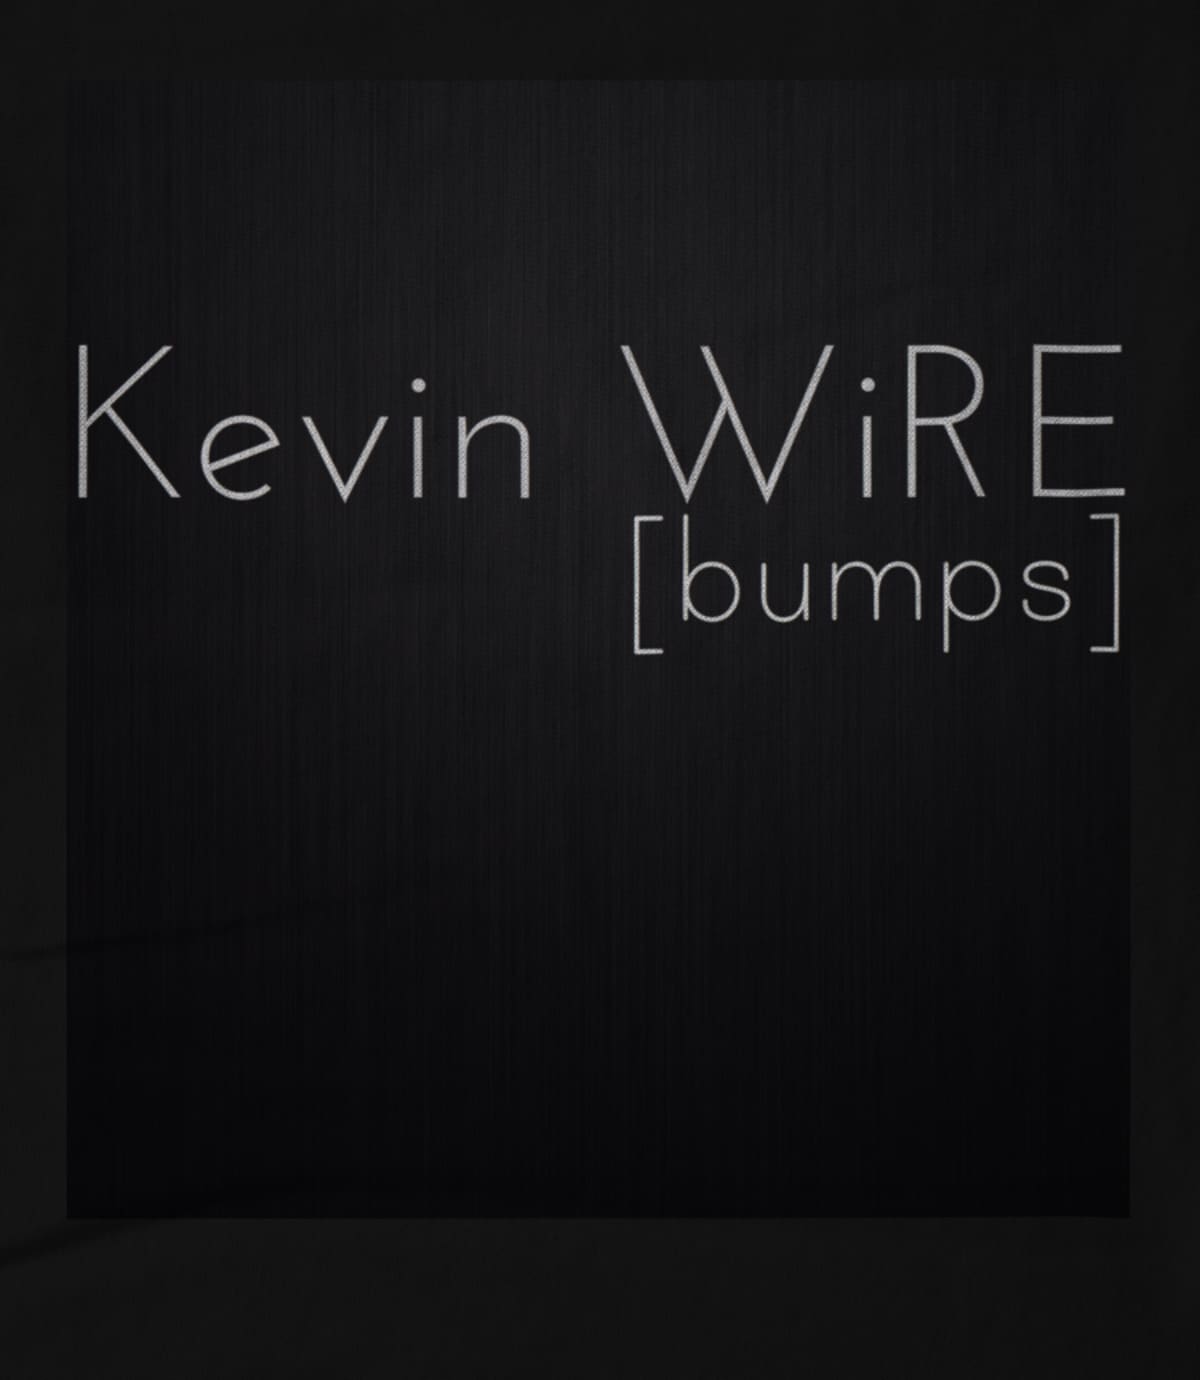 Kevin WiRE